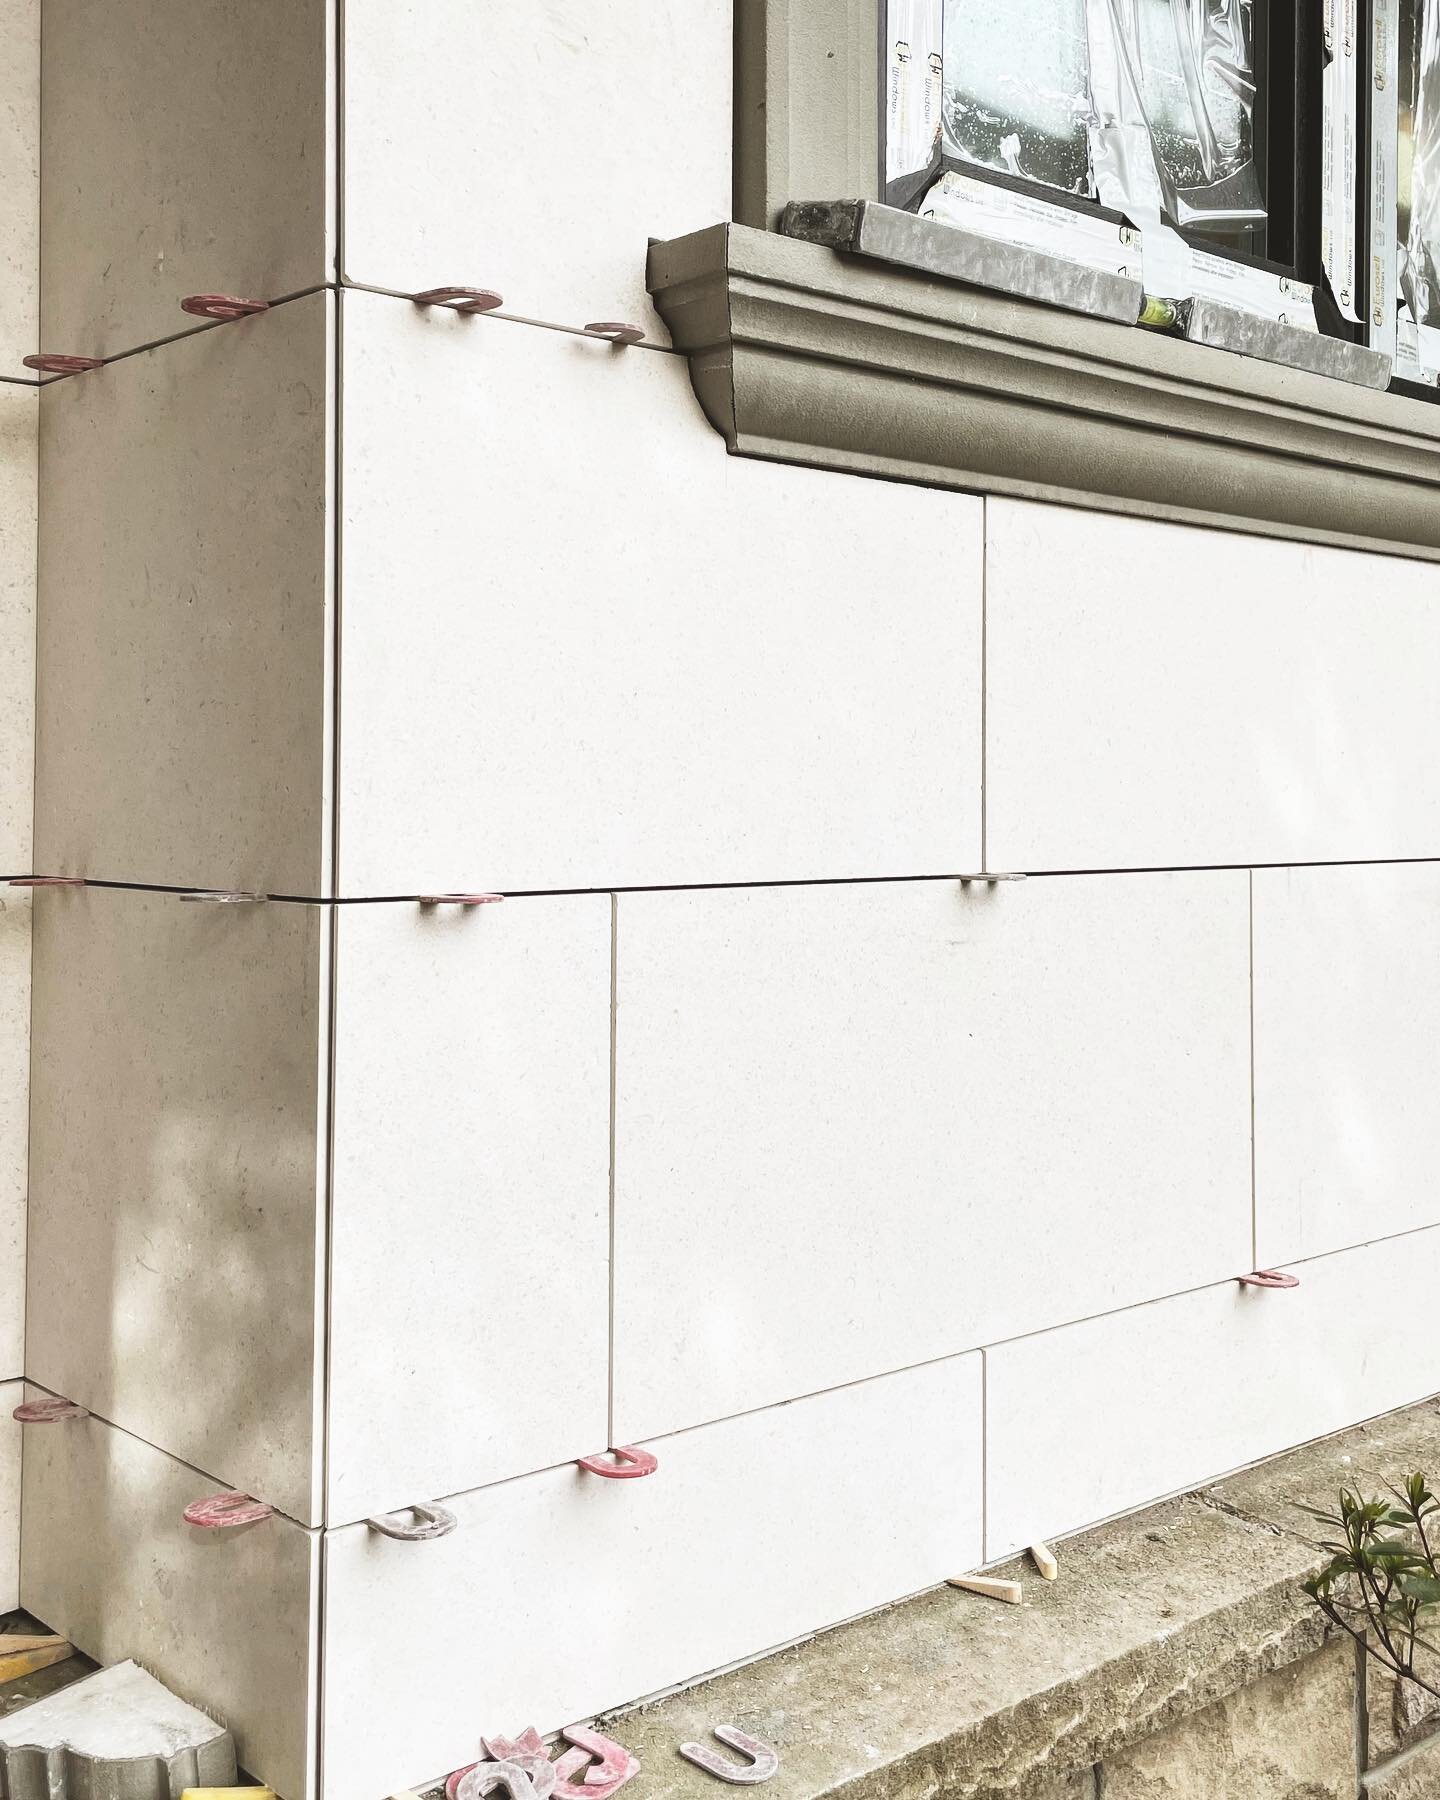 Artisanal Limestone Installation at our West 38TH Shaughnessy Project.